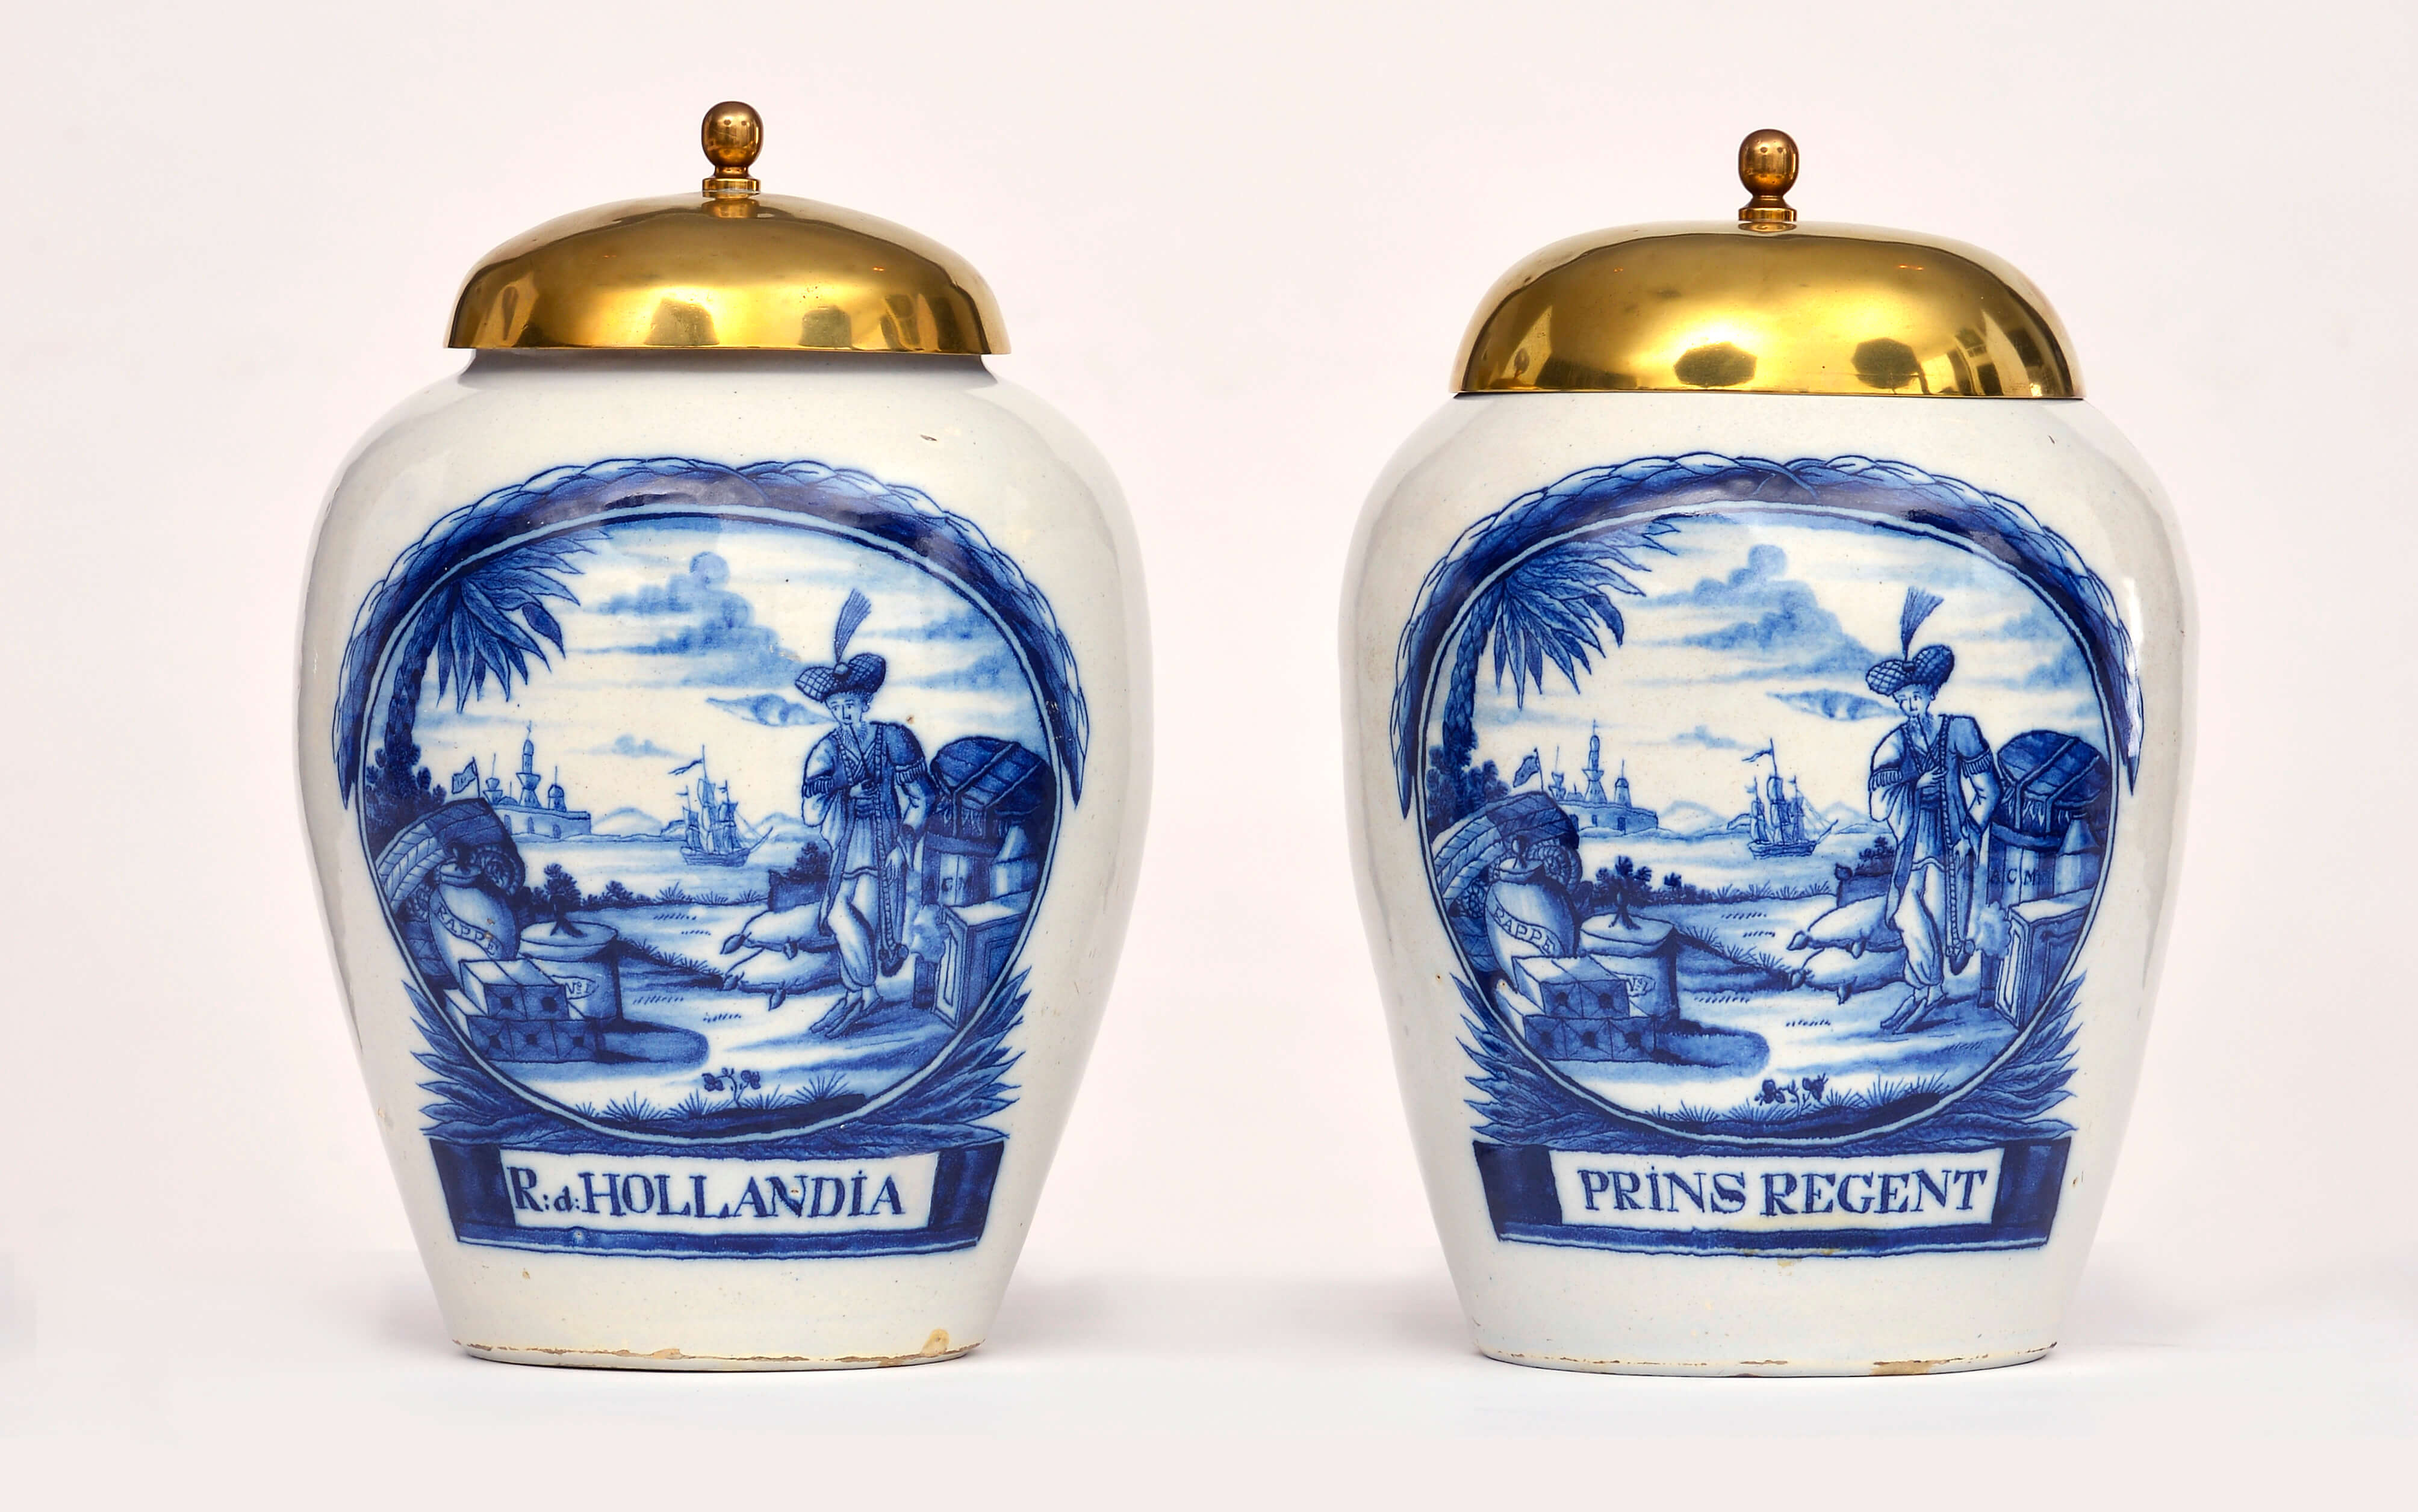 Antique Dutch Pottery Blue and White Tobacco Jars with Brass Covers